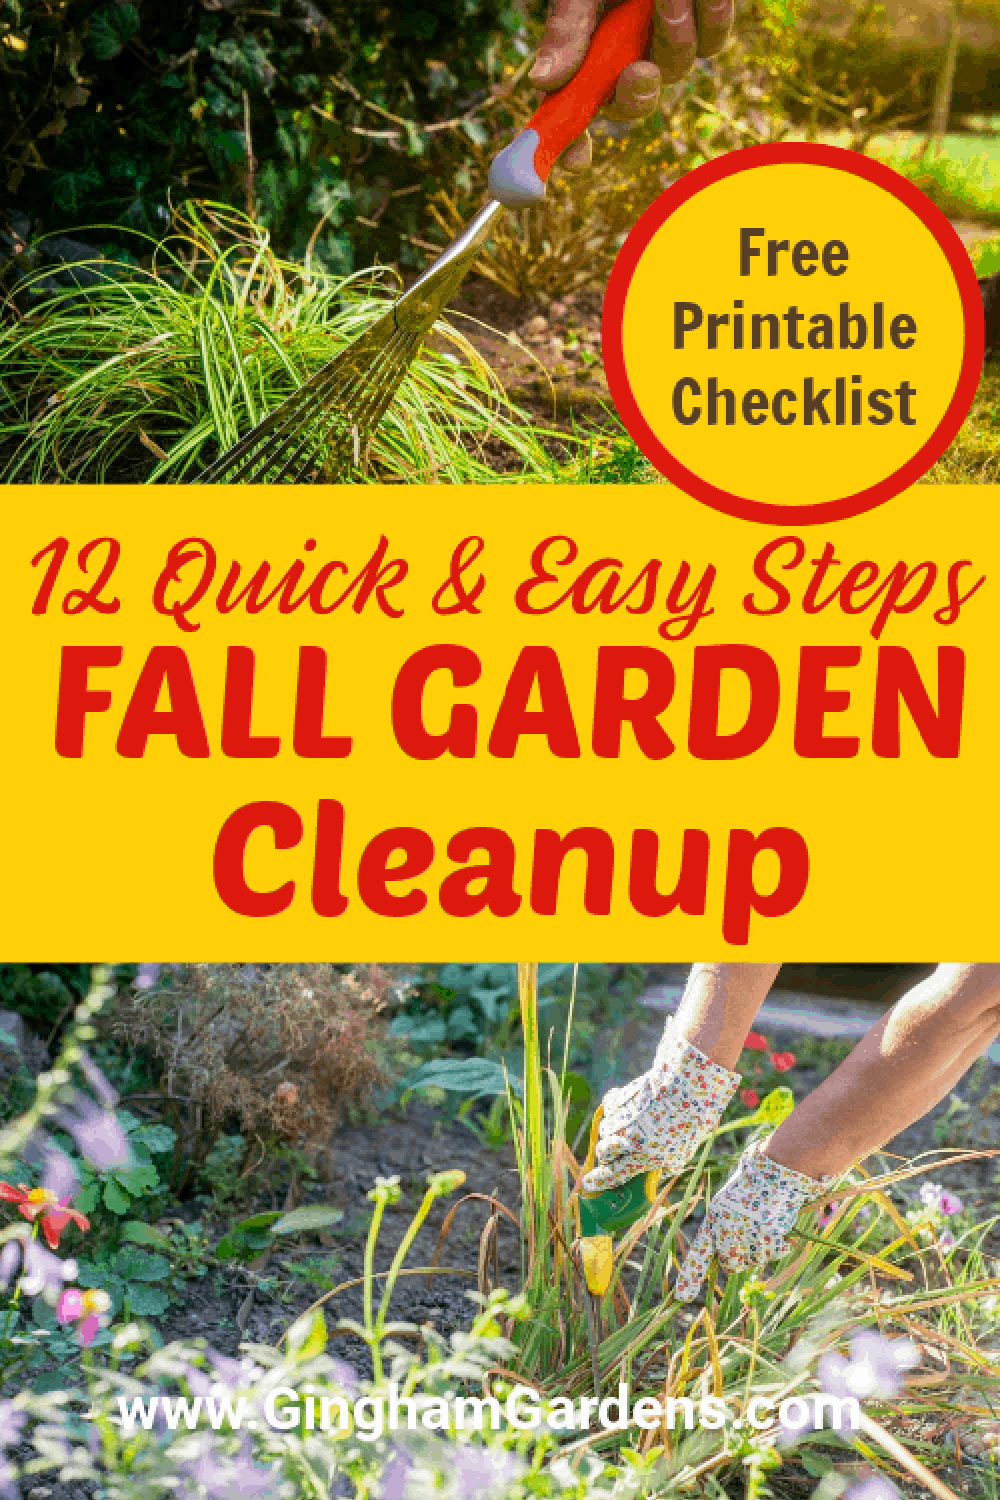 Images of Fall Gardens with Text Overlay - 12 Quick and Easy Steps Fall Garden Cleanup